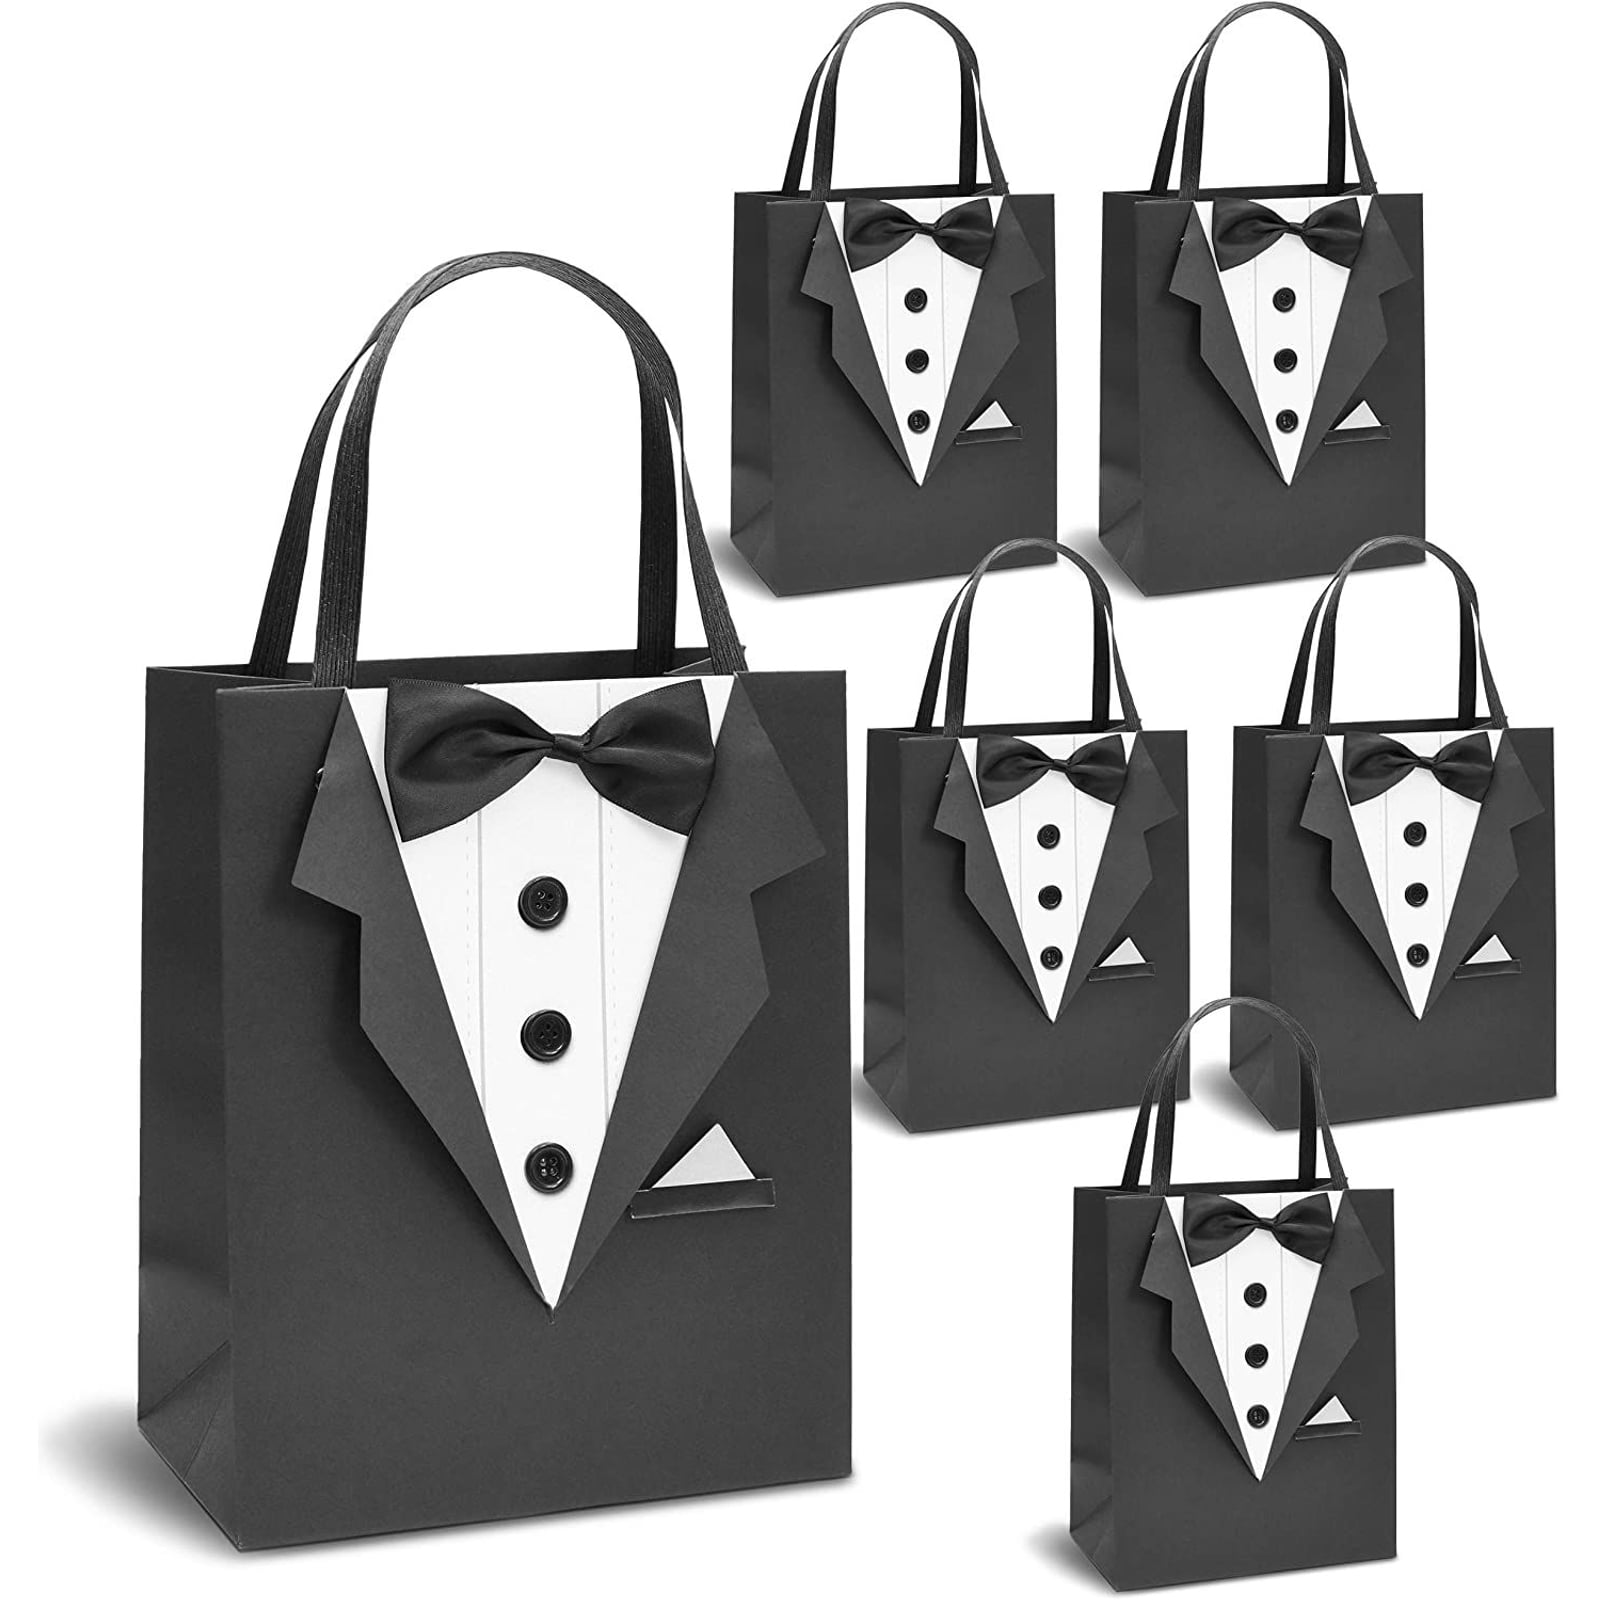 Tuxedo Gift Bags Wedding Present Paper Bags With Handles Black 